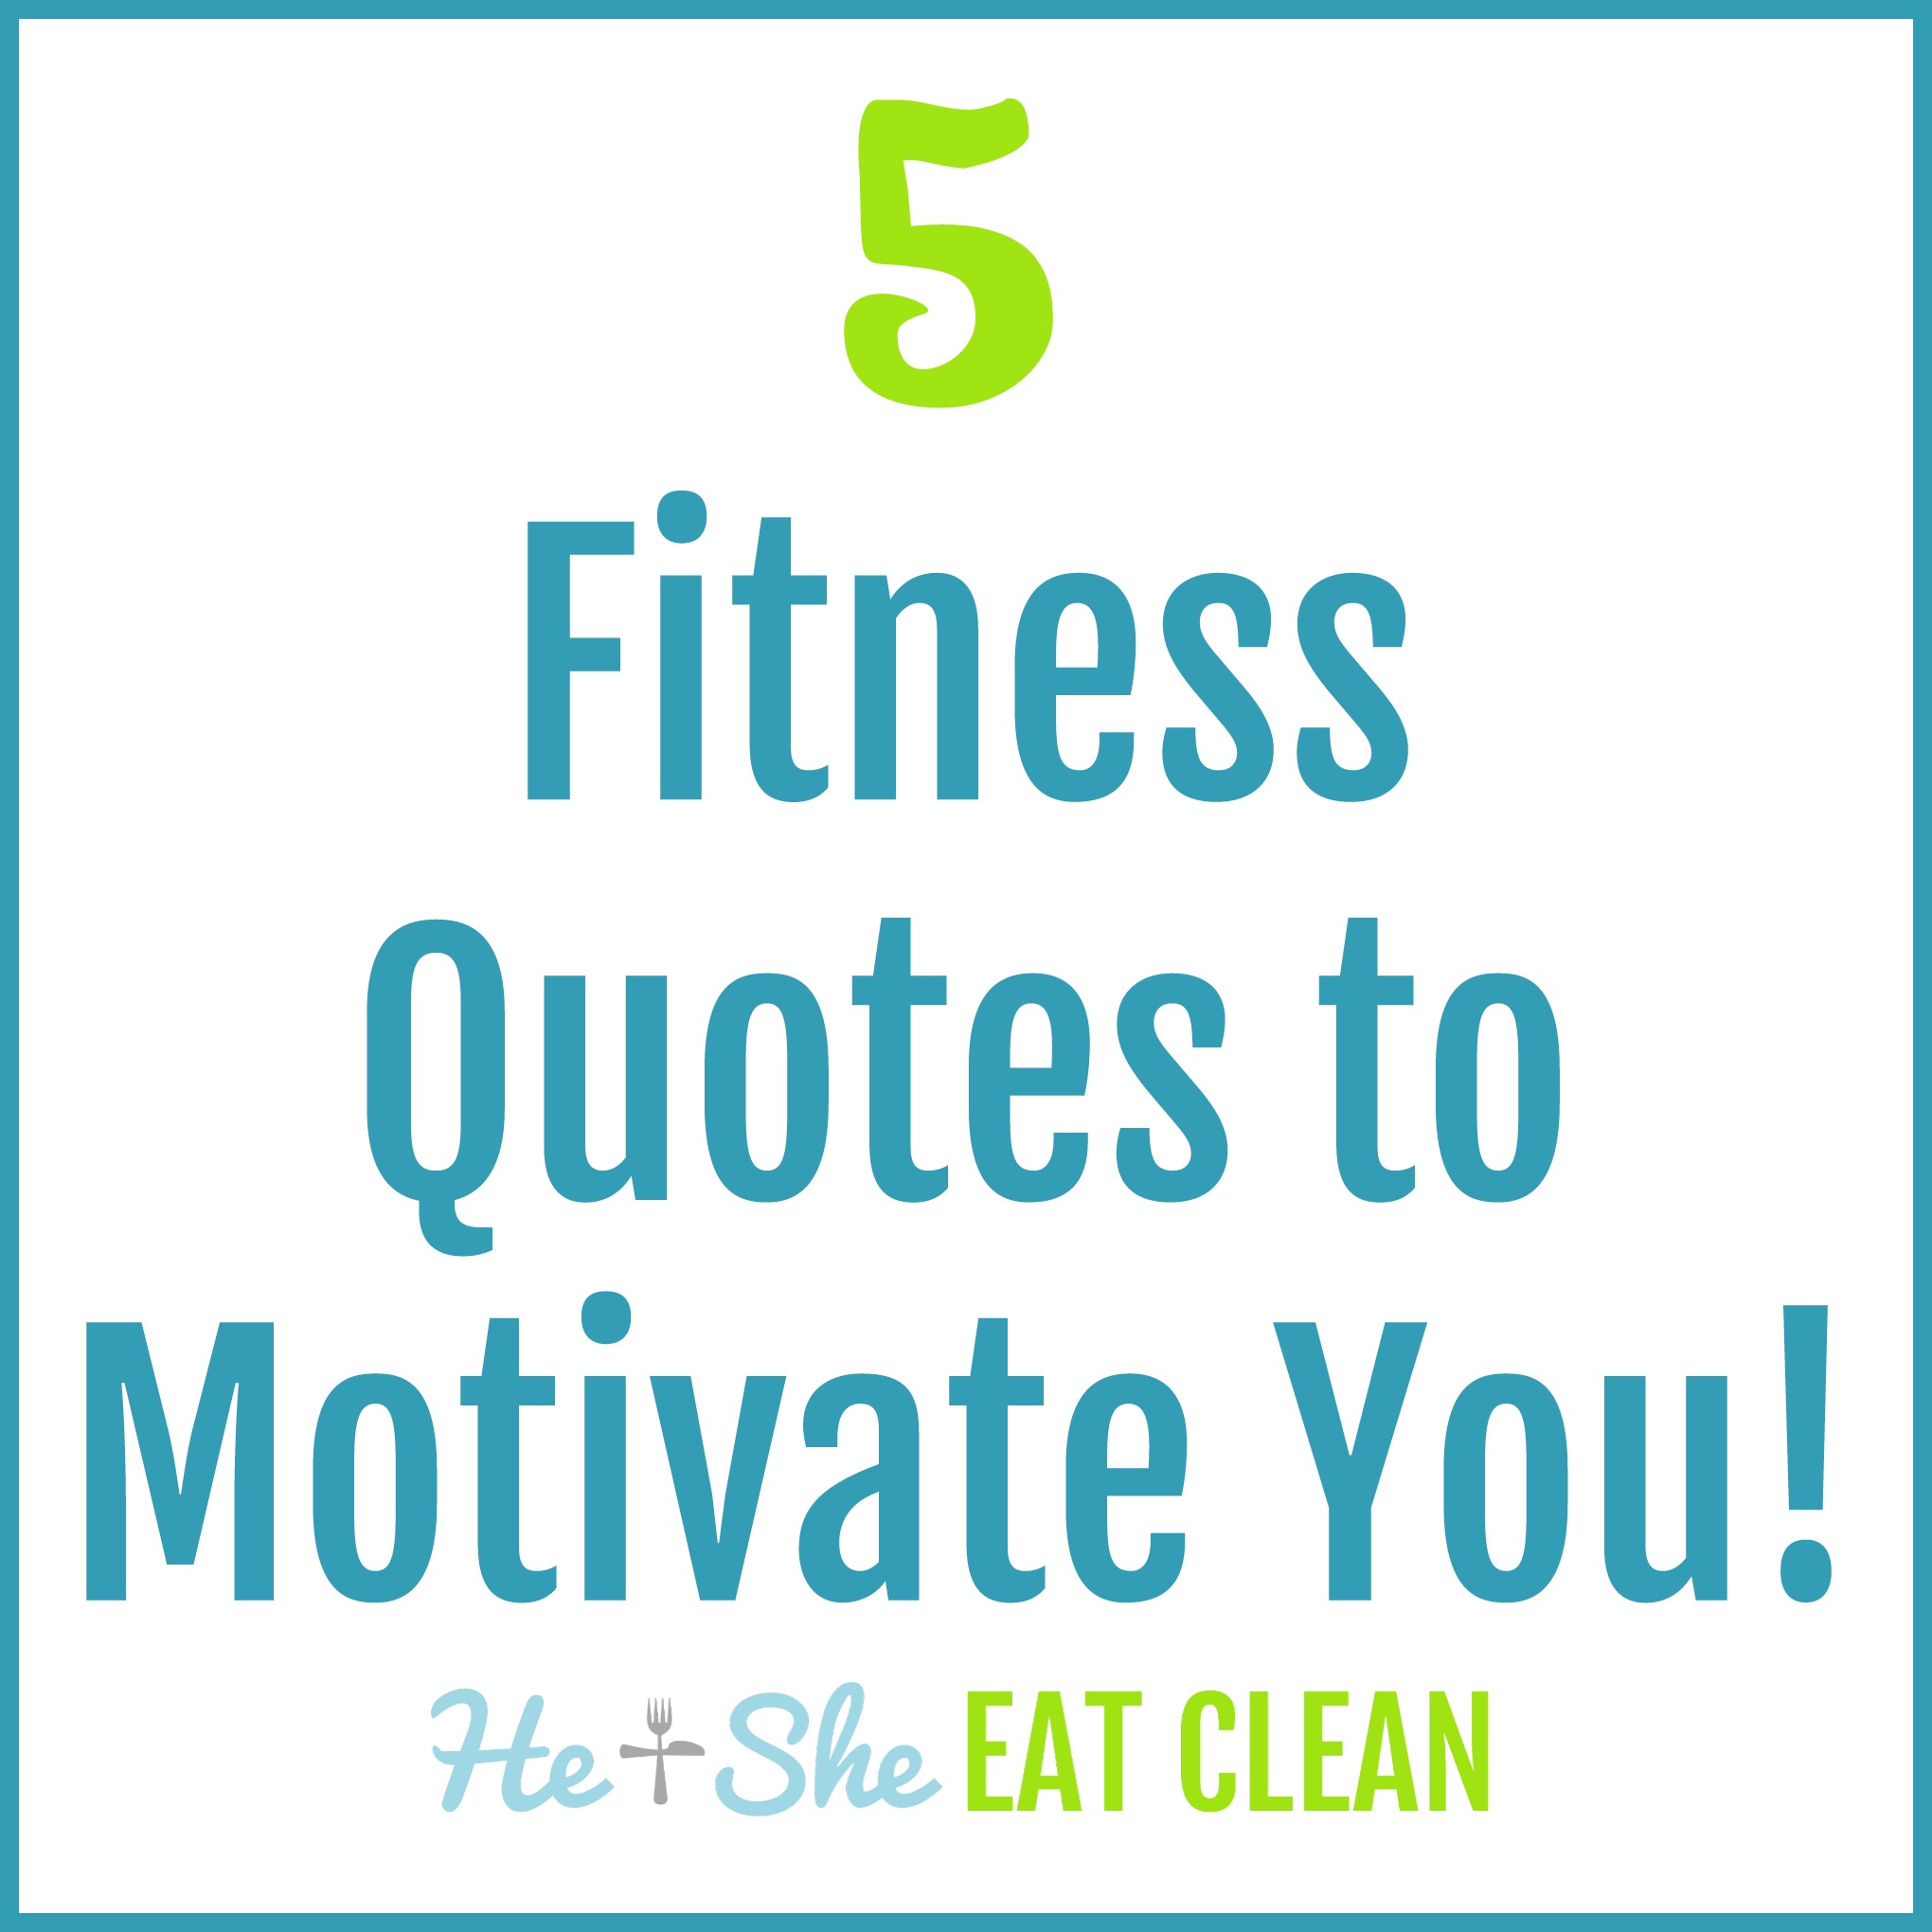 5 Fitness Quotes to Motivate You! — He & She Eat Clean